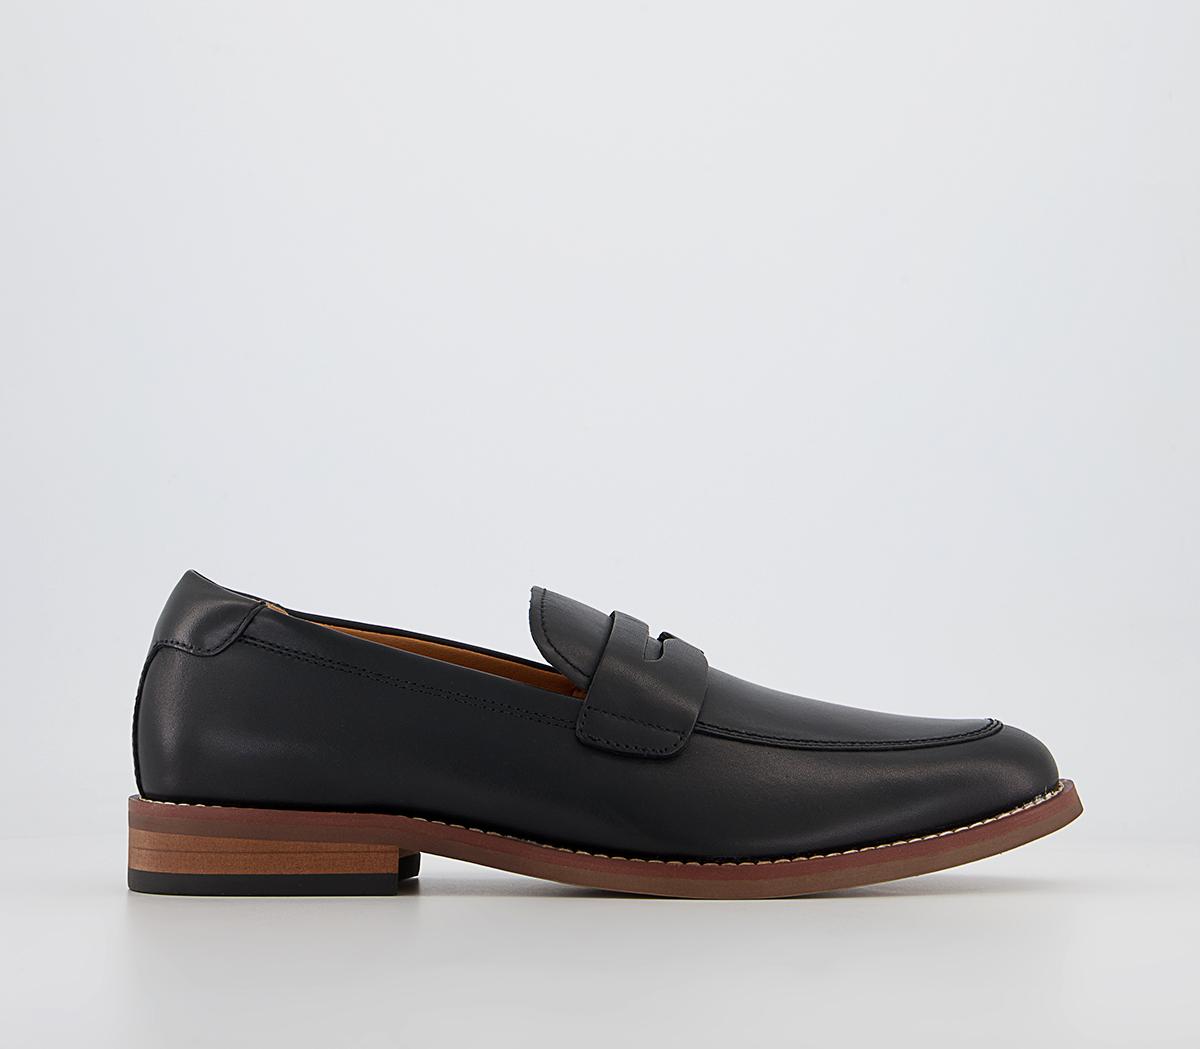 OFFICEMedway Contrast Sole LoafersBlack Leather